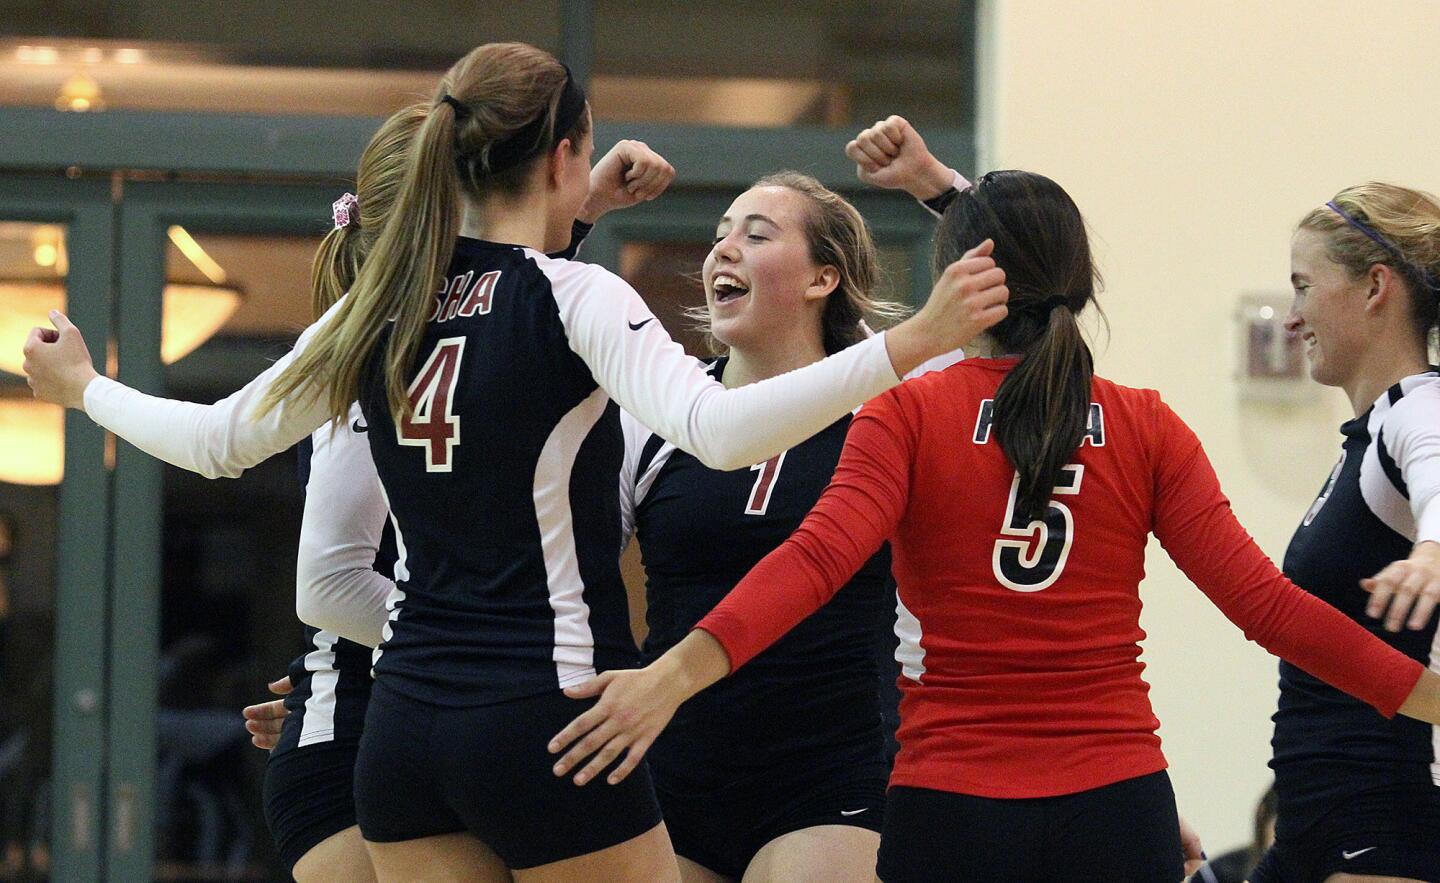 Flintridge Sacred Heart's Sophia Coffey celebrates with her teammates after defeating Ayala in a first-round CIF Southern Section Division 1-A volleyball match at FSHA on Tuesday, November 12, 2013. FSHA won the match 3-1. (Tim Berger/Staff Photographer)